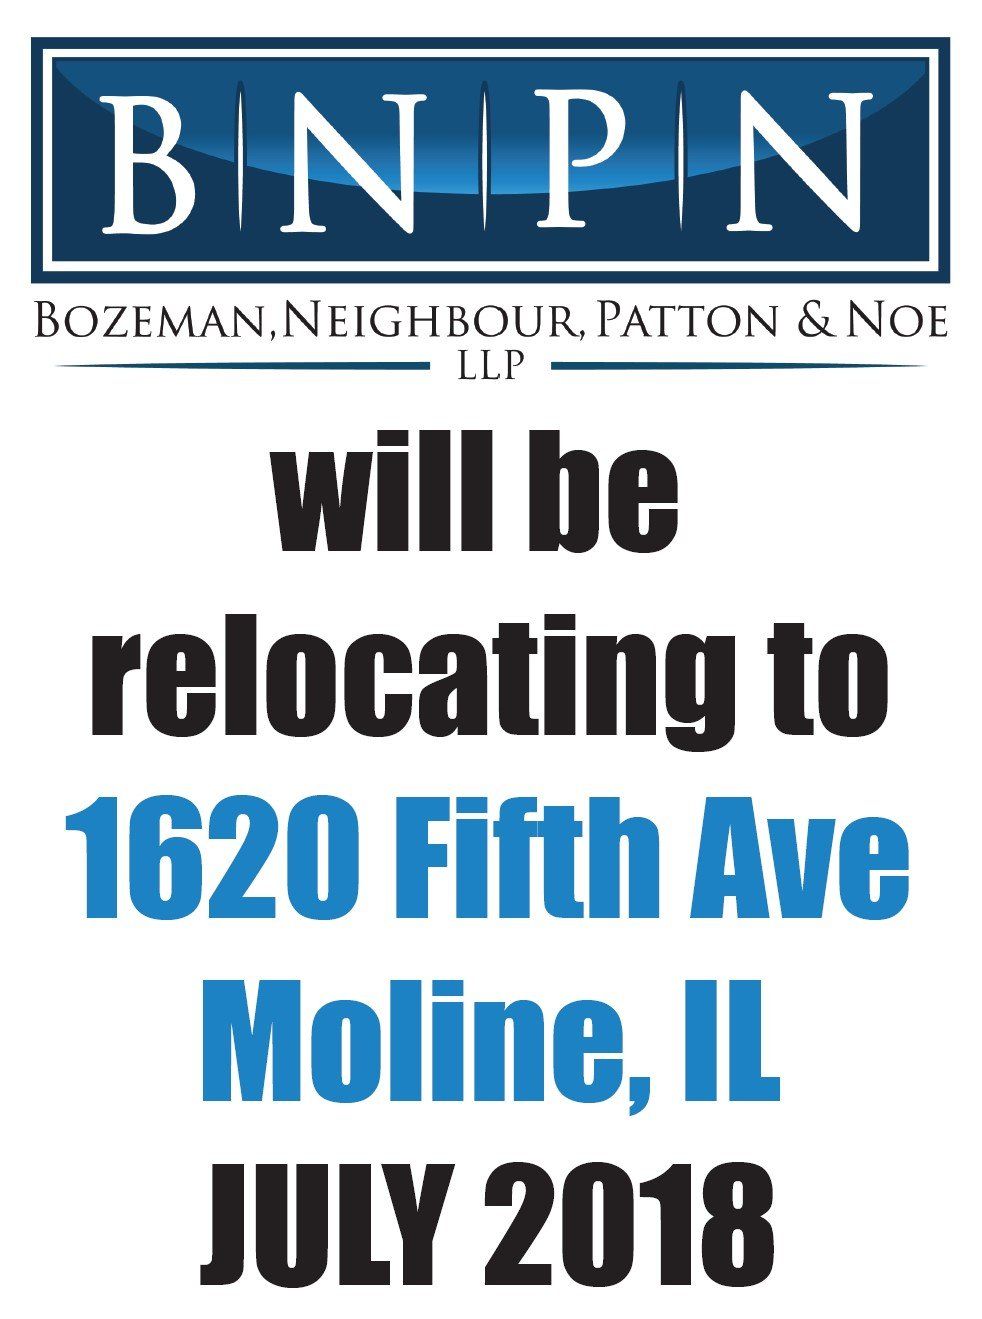 BNPN banner notice to relocate to 1620 Fifth Ave, Moline, IL